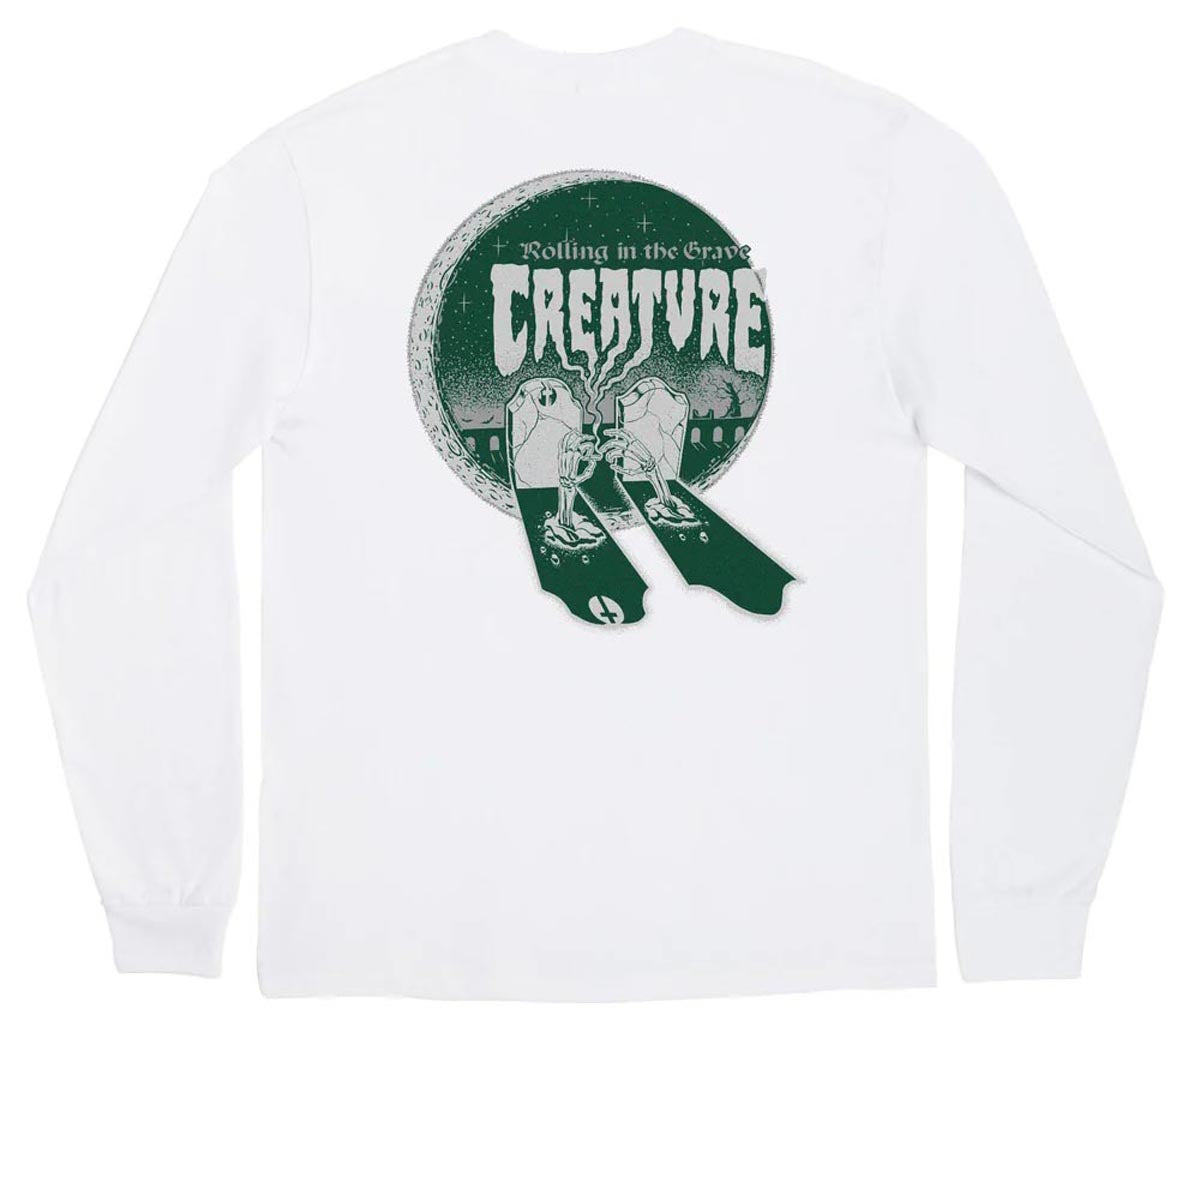 Creature Grave Roller Long Sleeve T-Shirt - White image 1